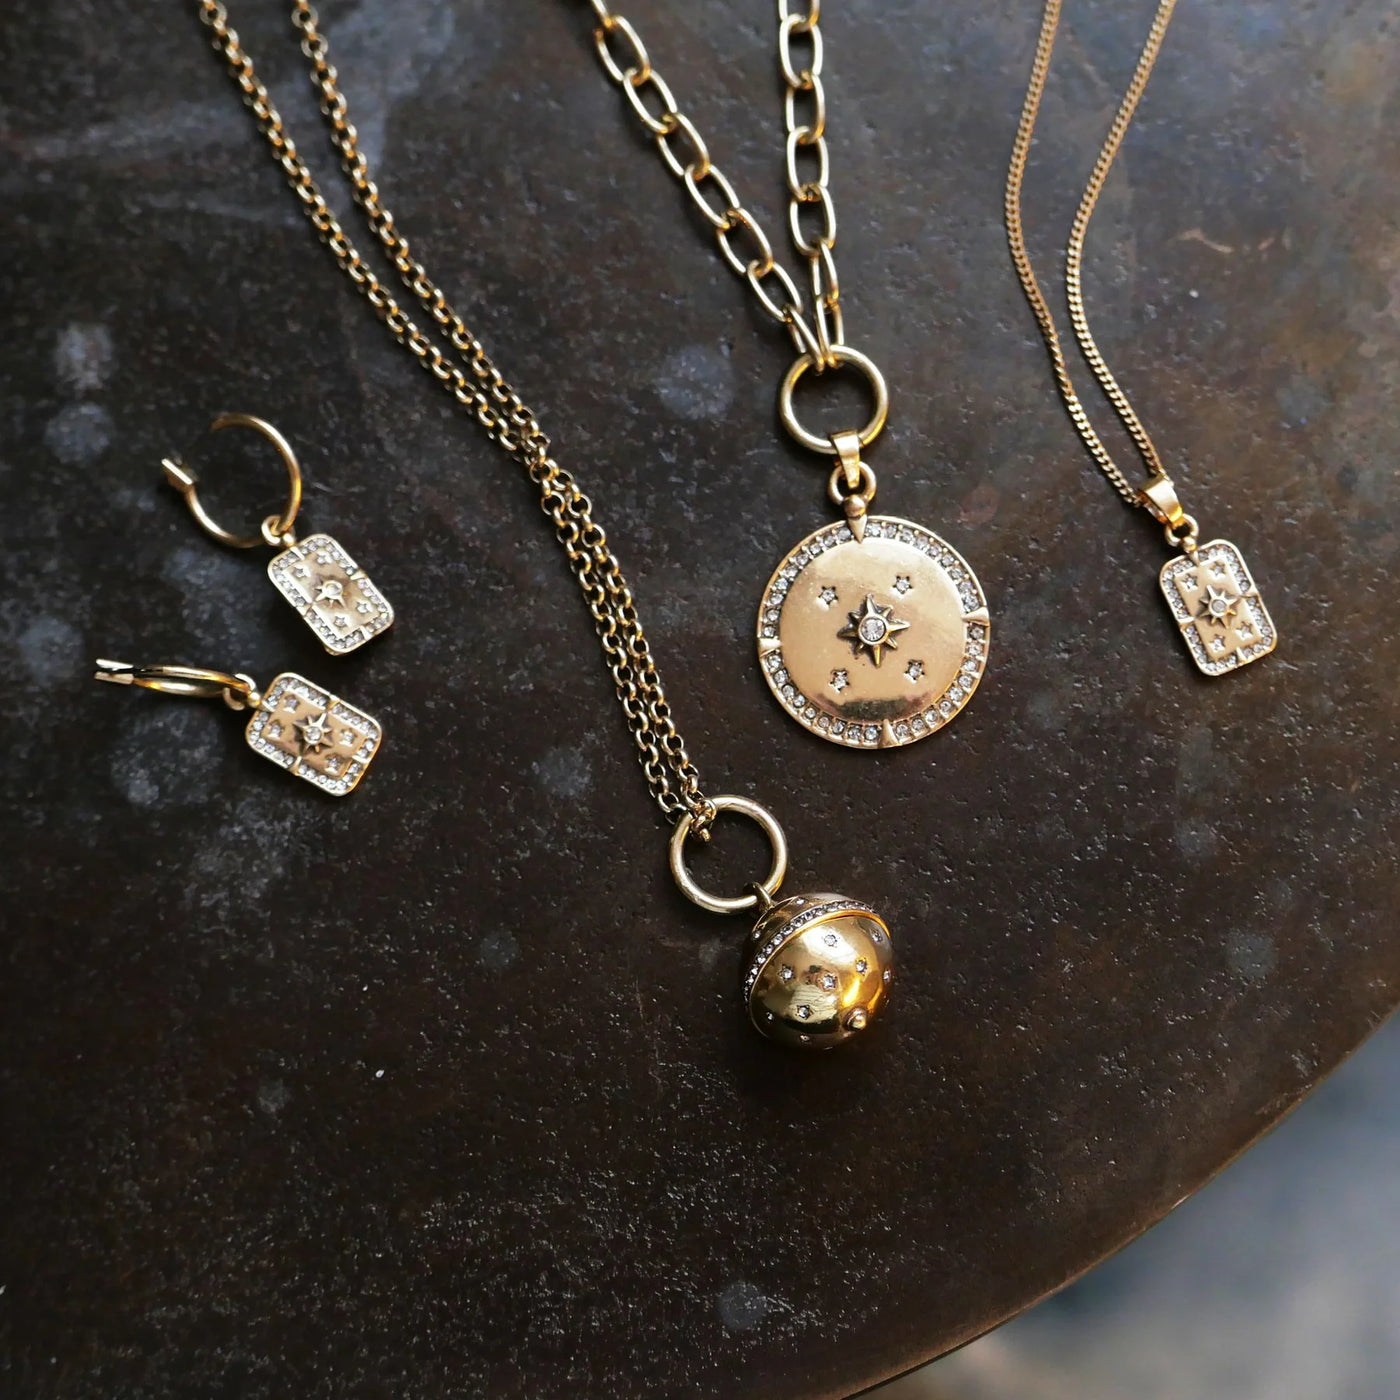 Astro Ball Necklace - Gold Plated